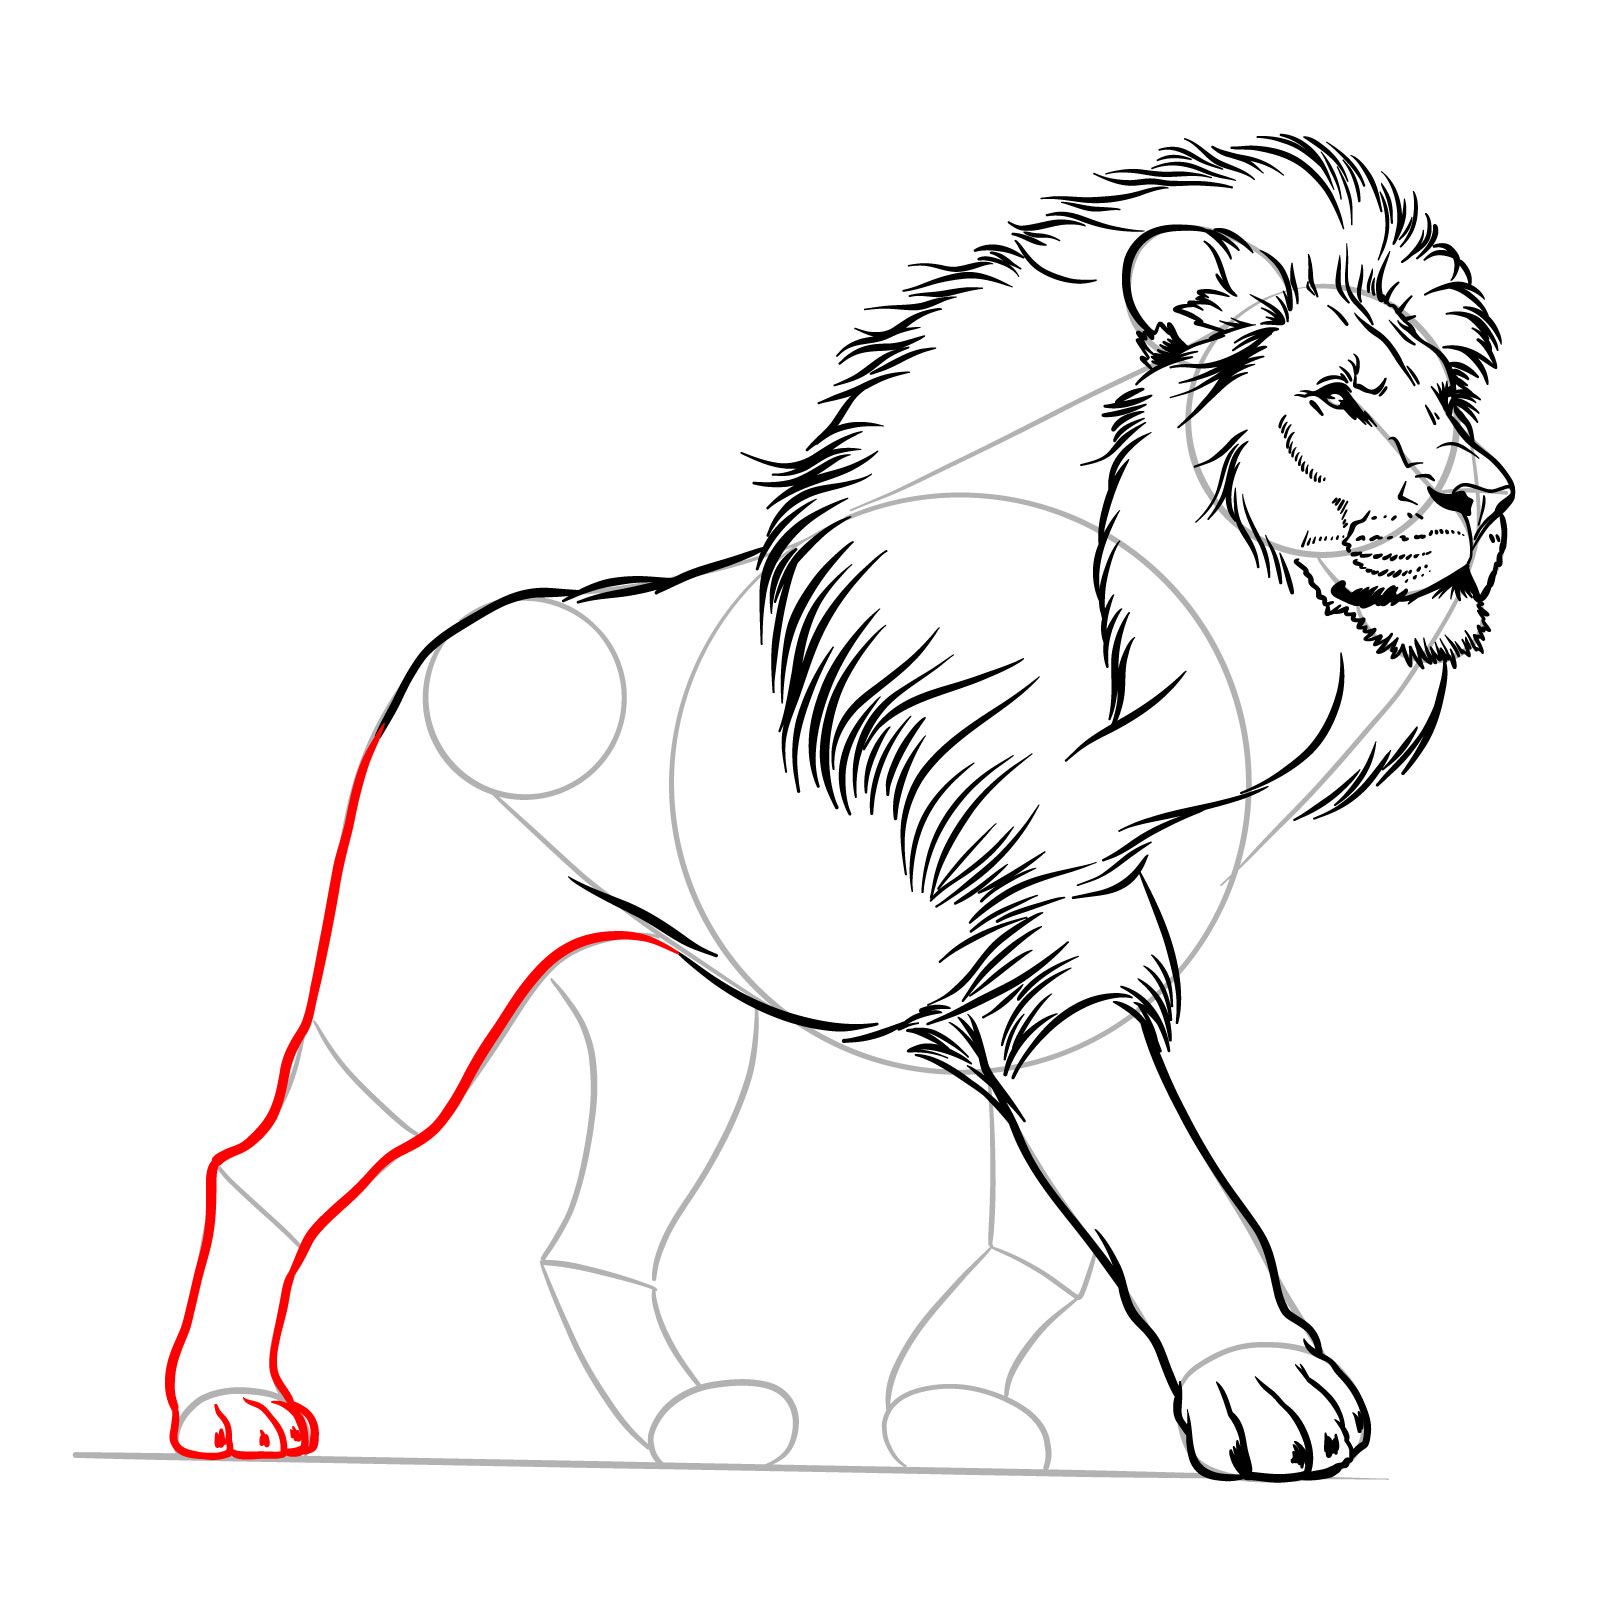 Detailing the hind right leg of a walking lion - step 11